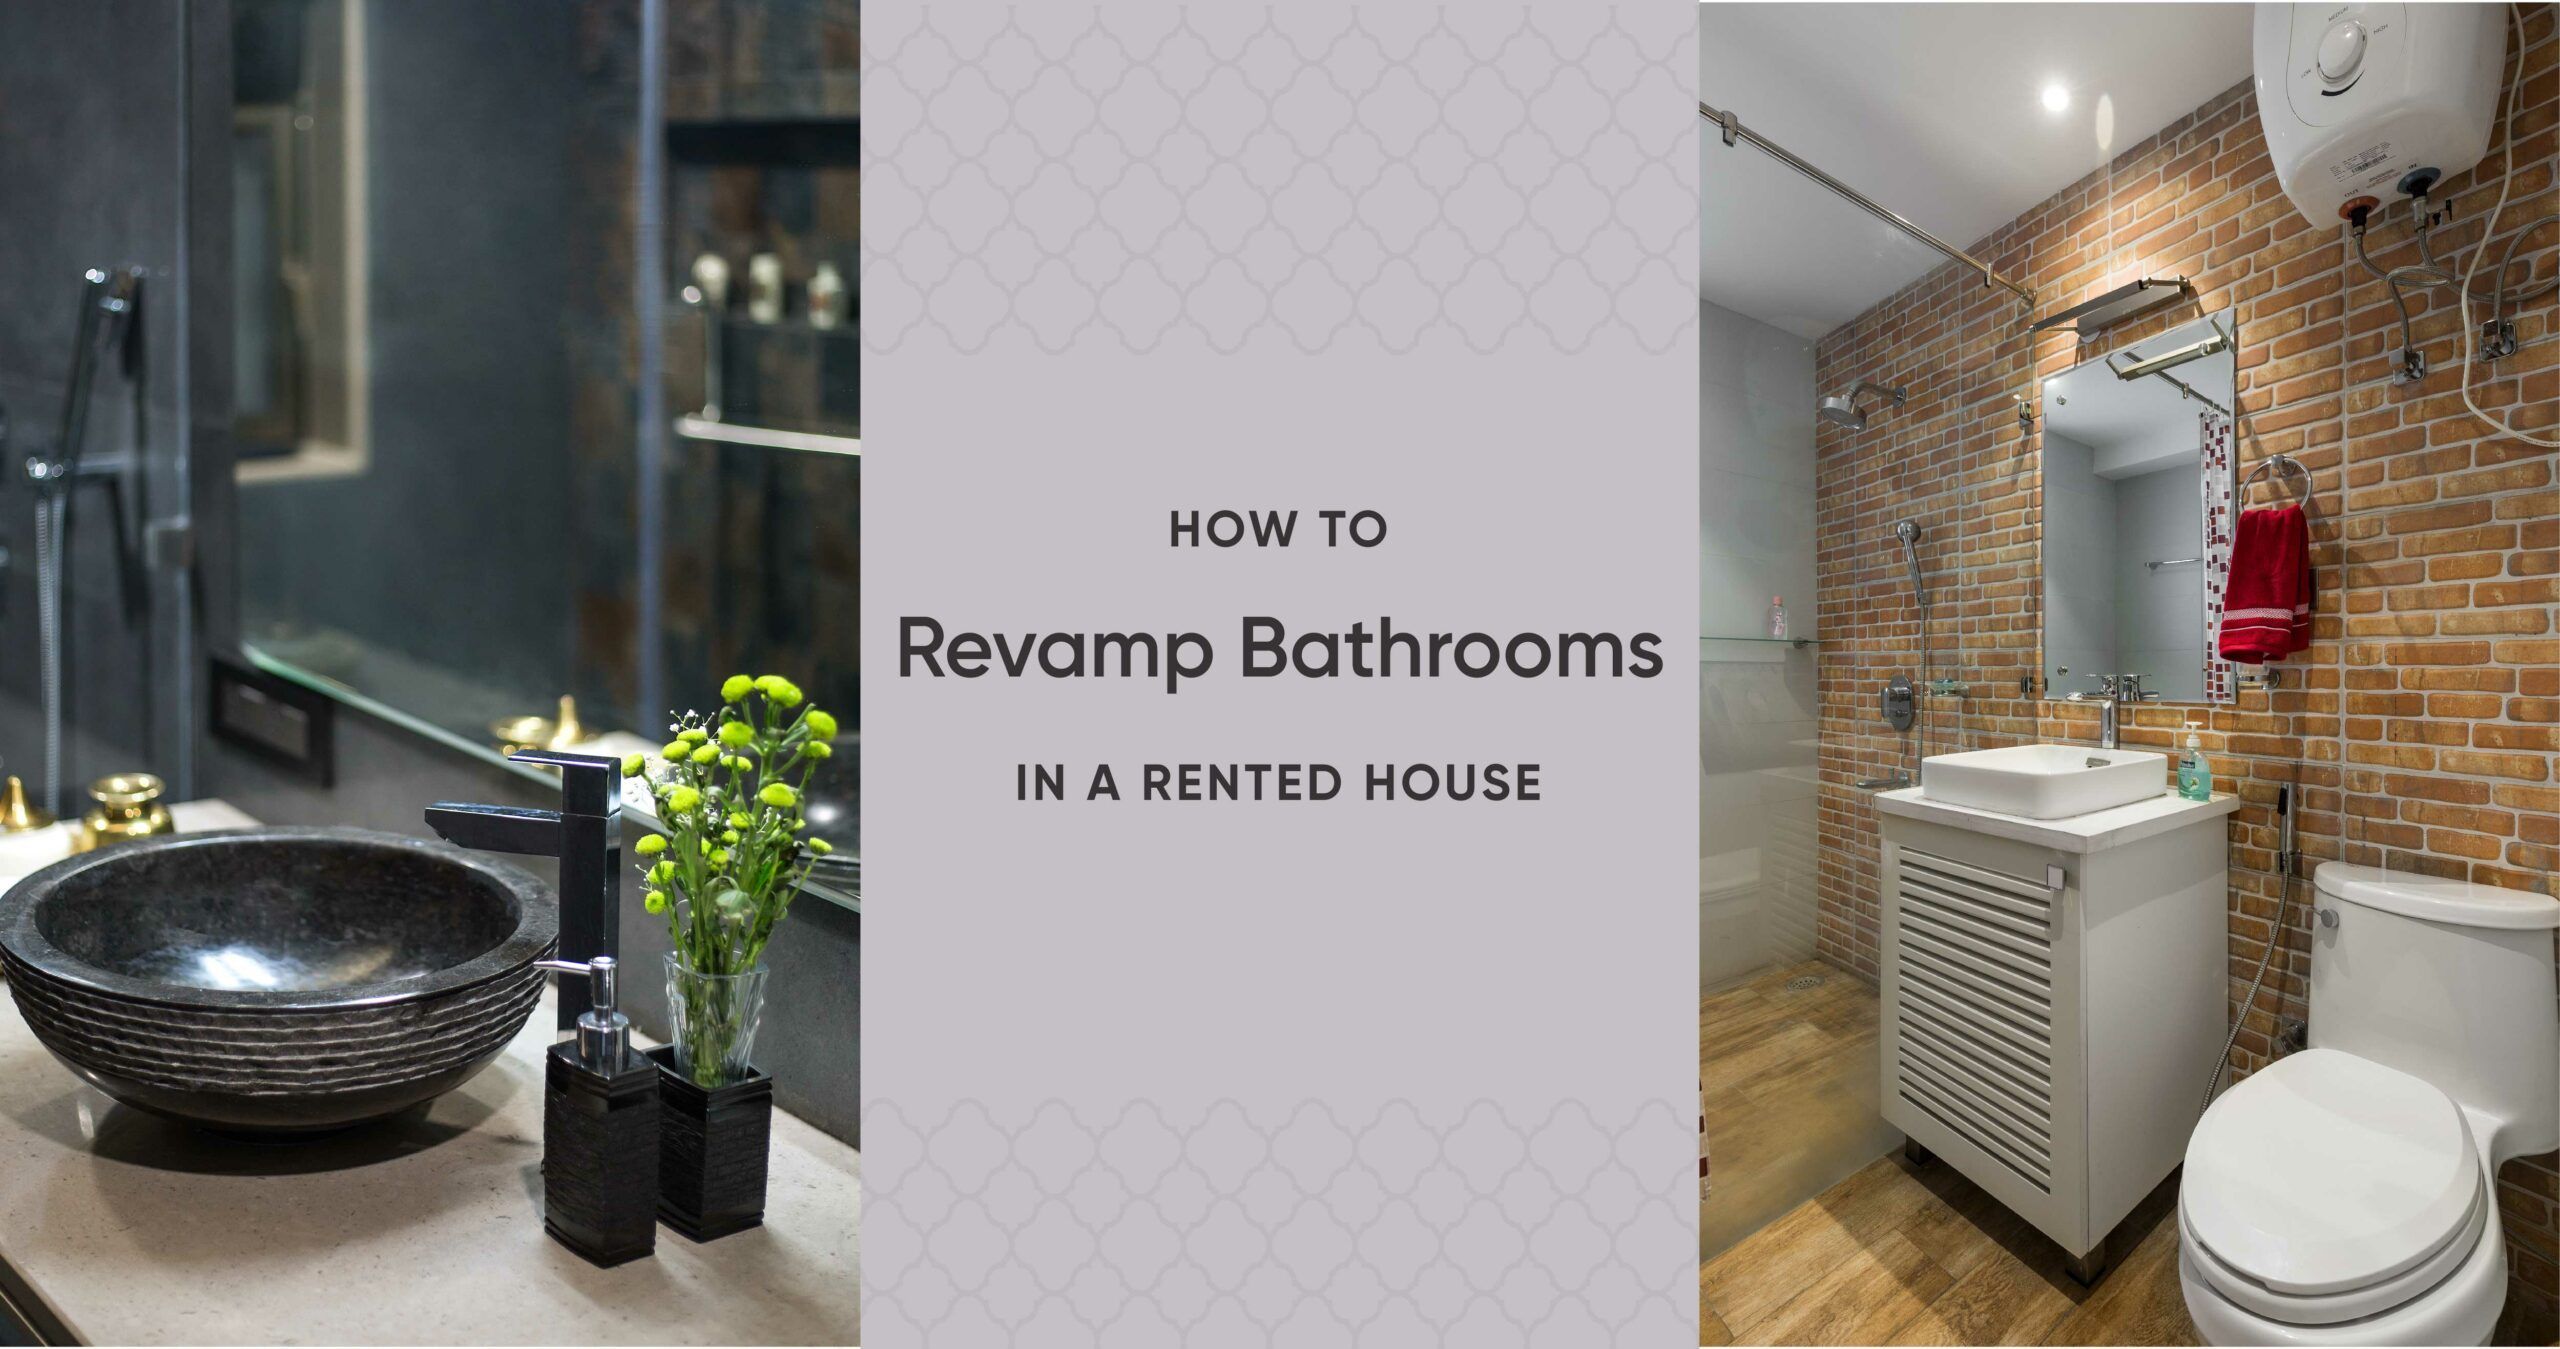 A Tenant’s Guide to Better Bathrooms Using Budget Ideas